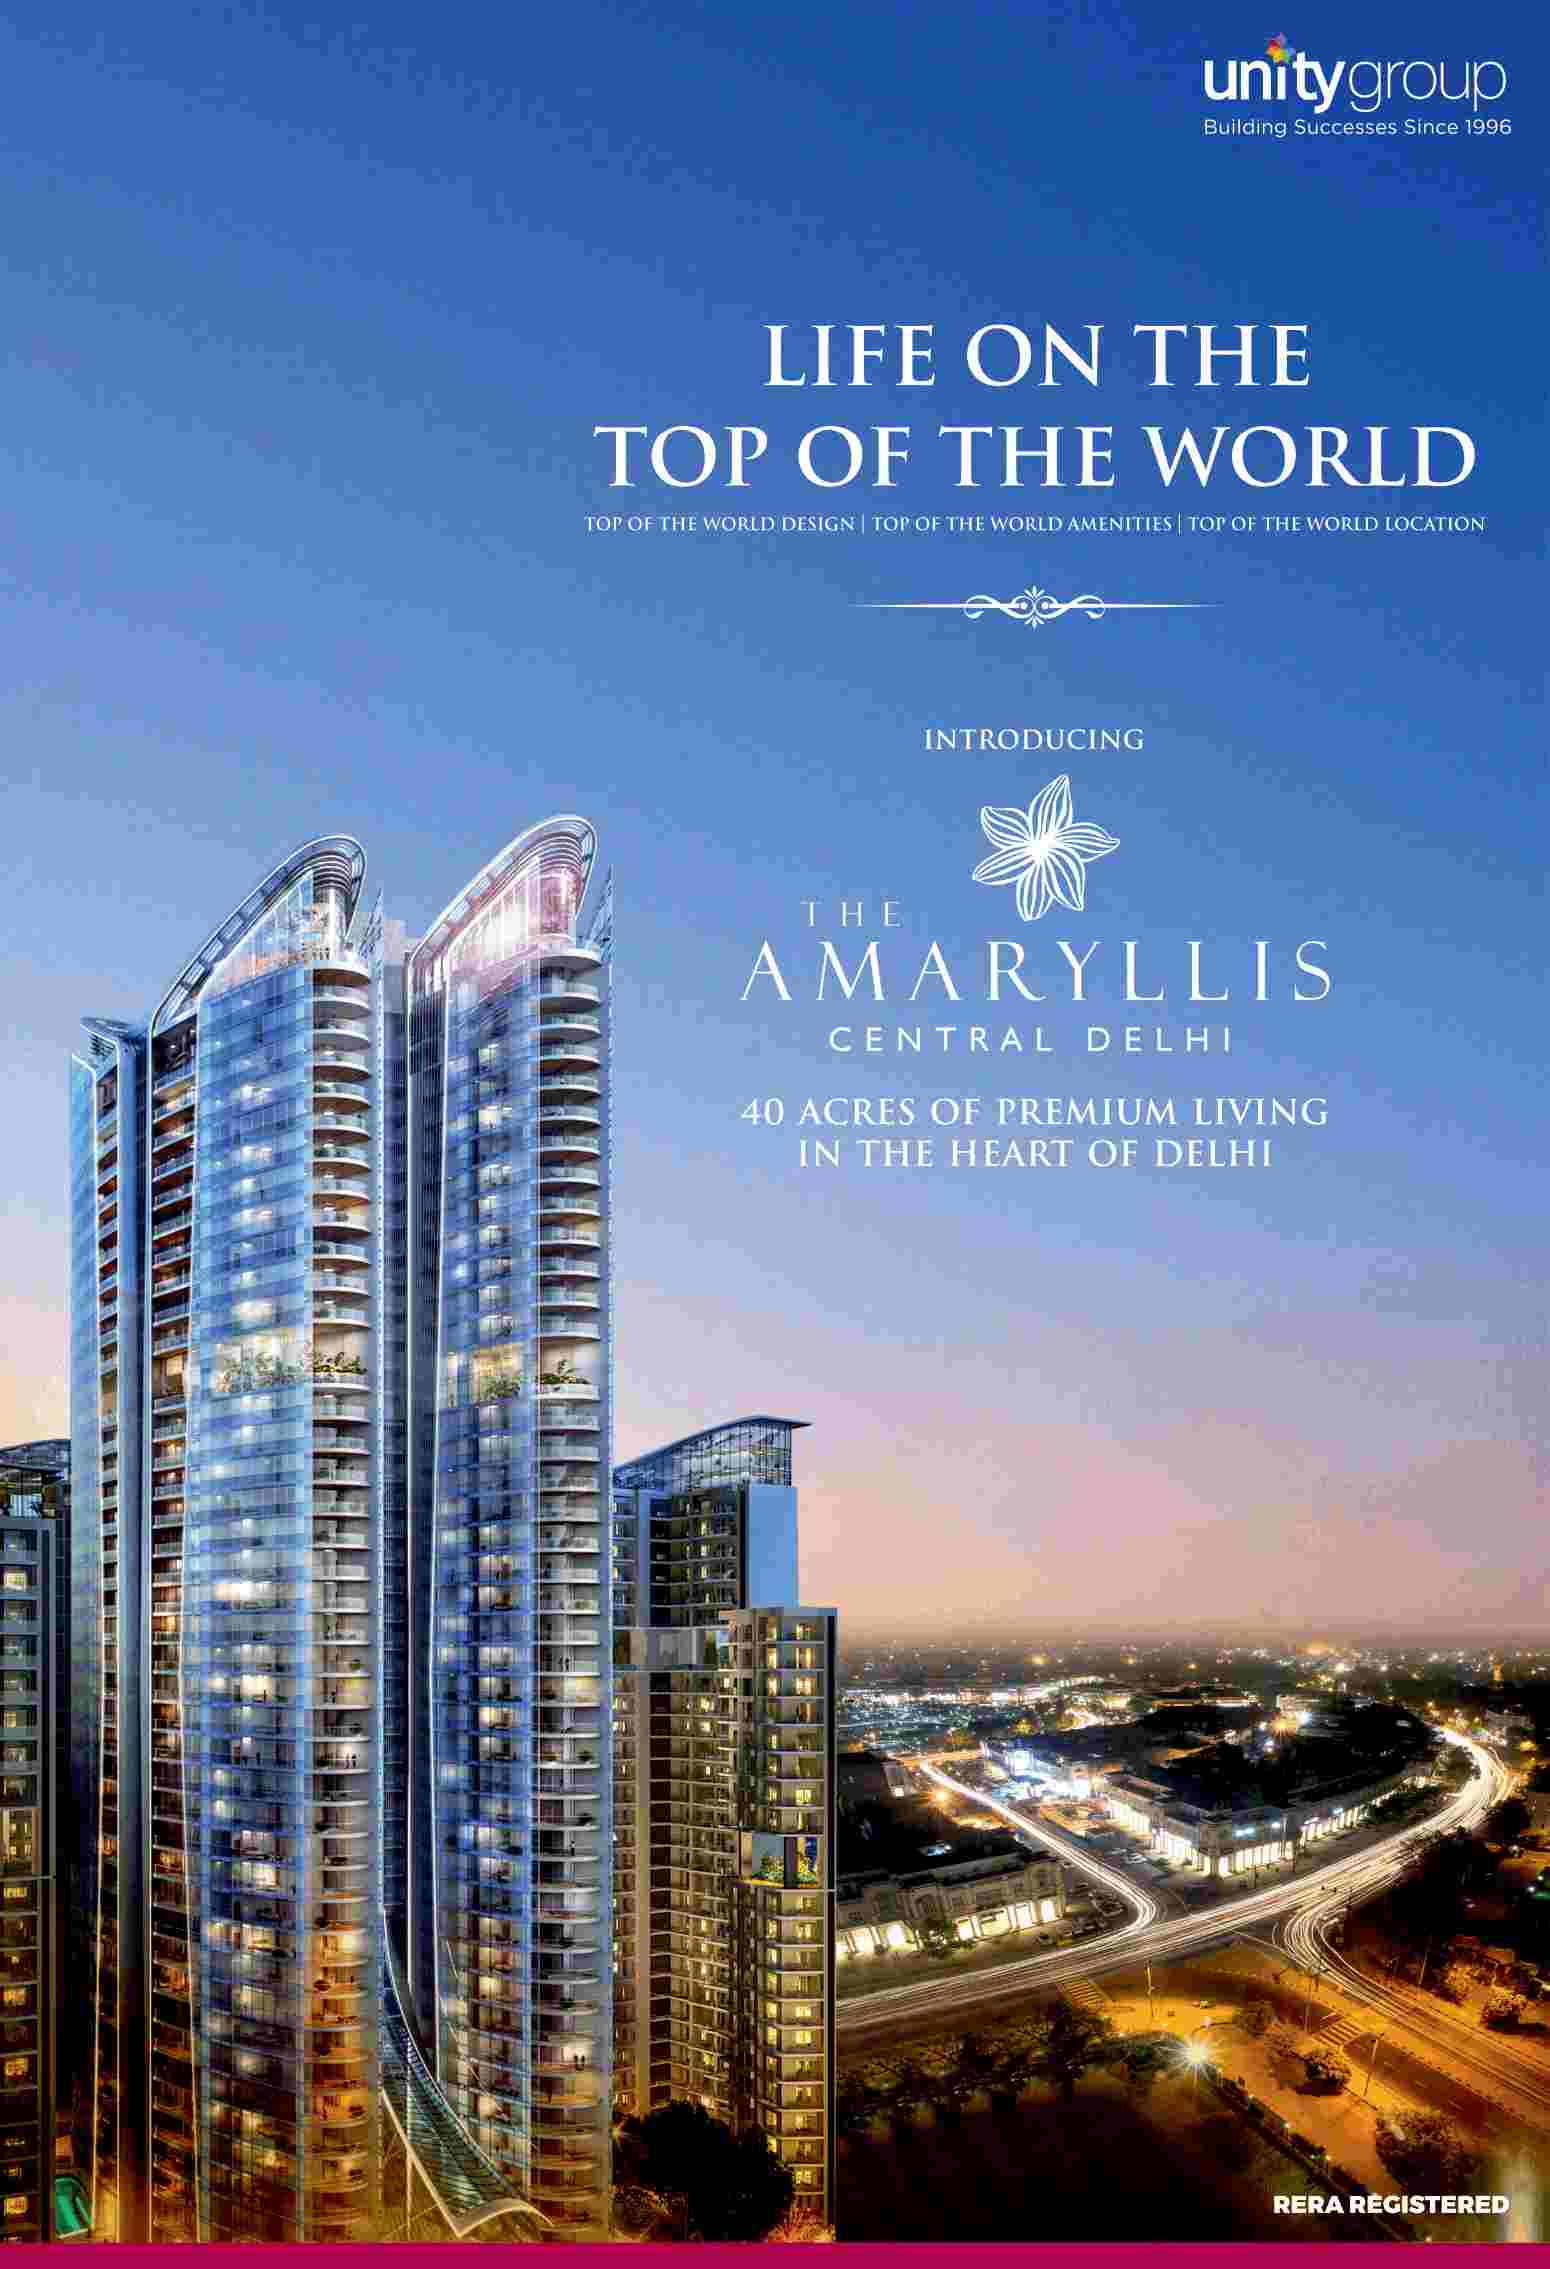 Experience 40 acres of premium living in the heart of Delhi at Unity The Amaryllis Update